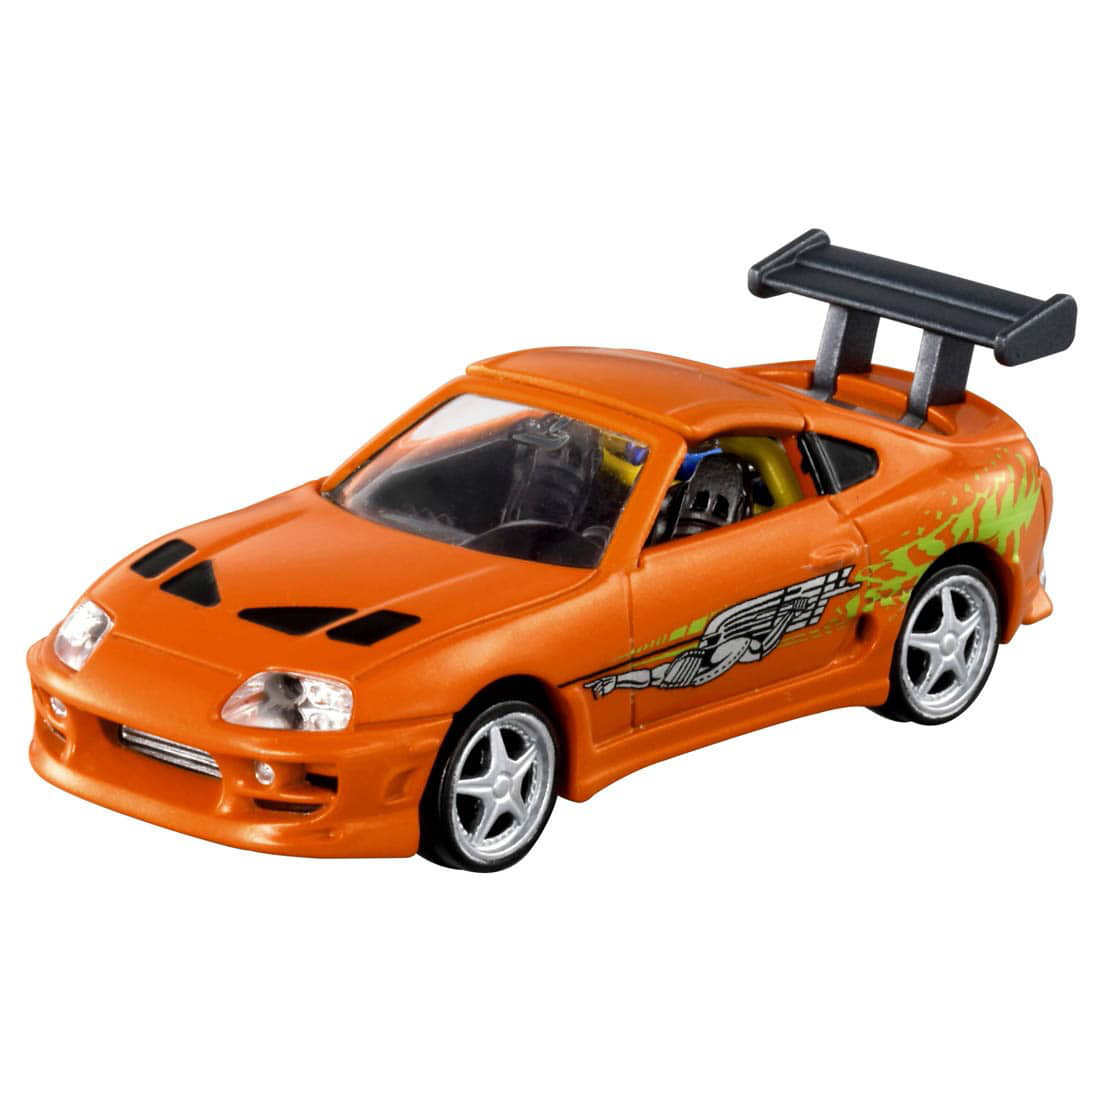 Tomica Premium Unlimited 03 The Fast and the Furious Supra | HLJ.com